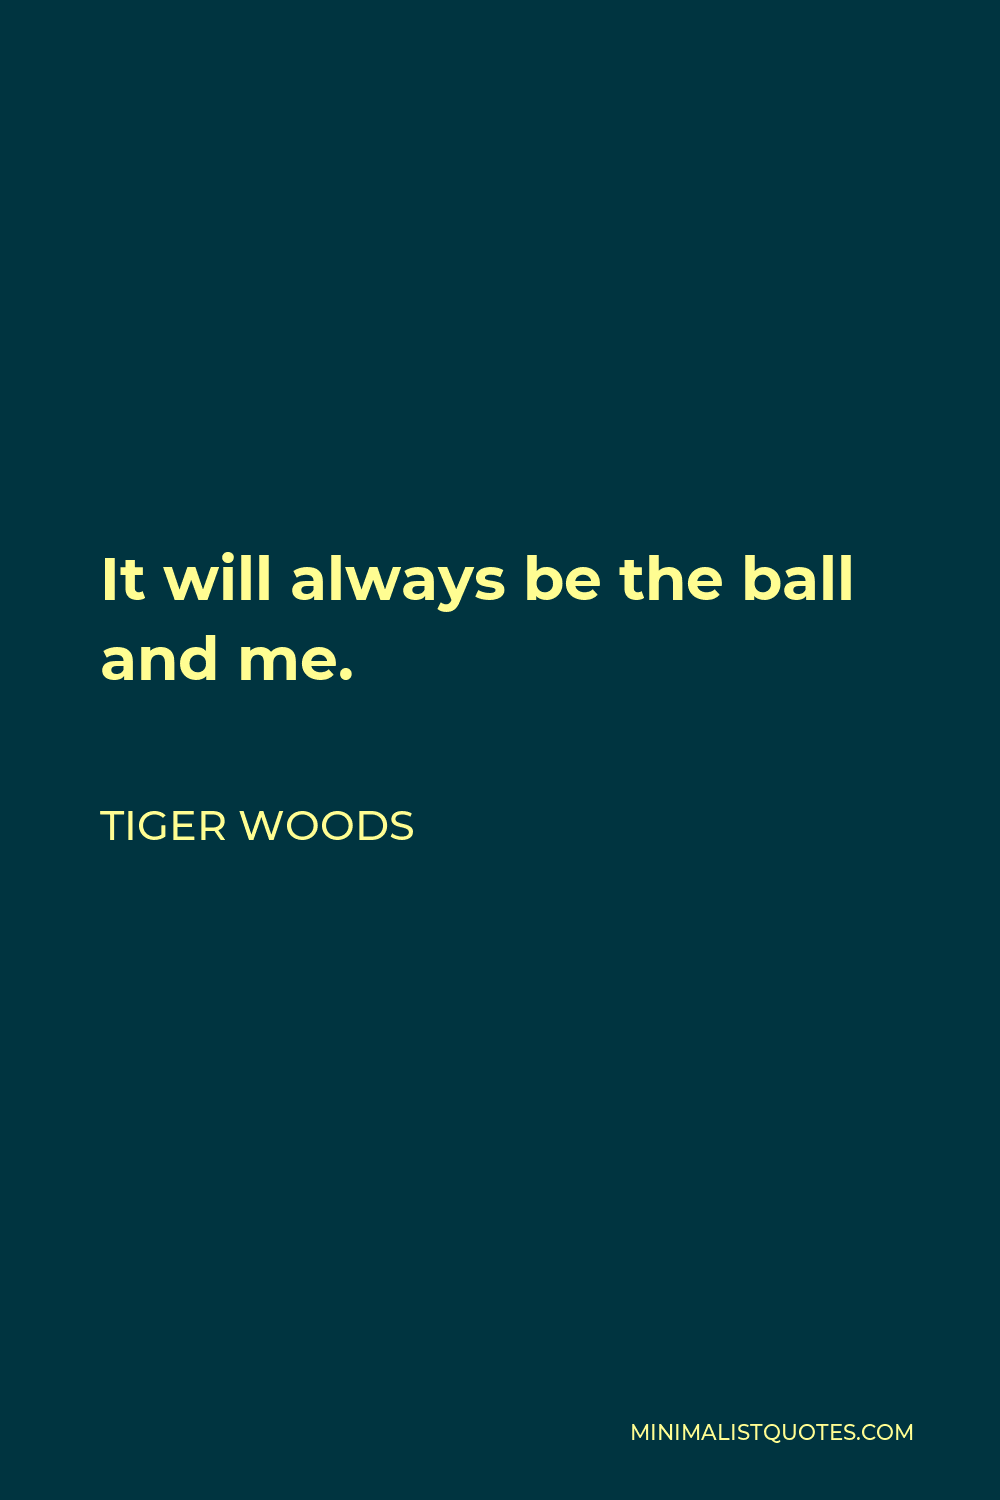 Tiger Woods Quote - It will always be the ball and me.